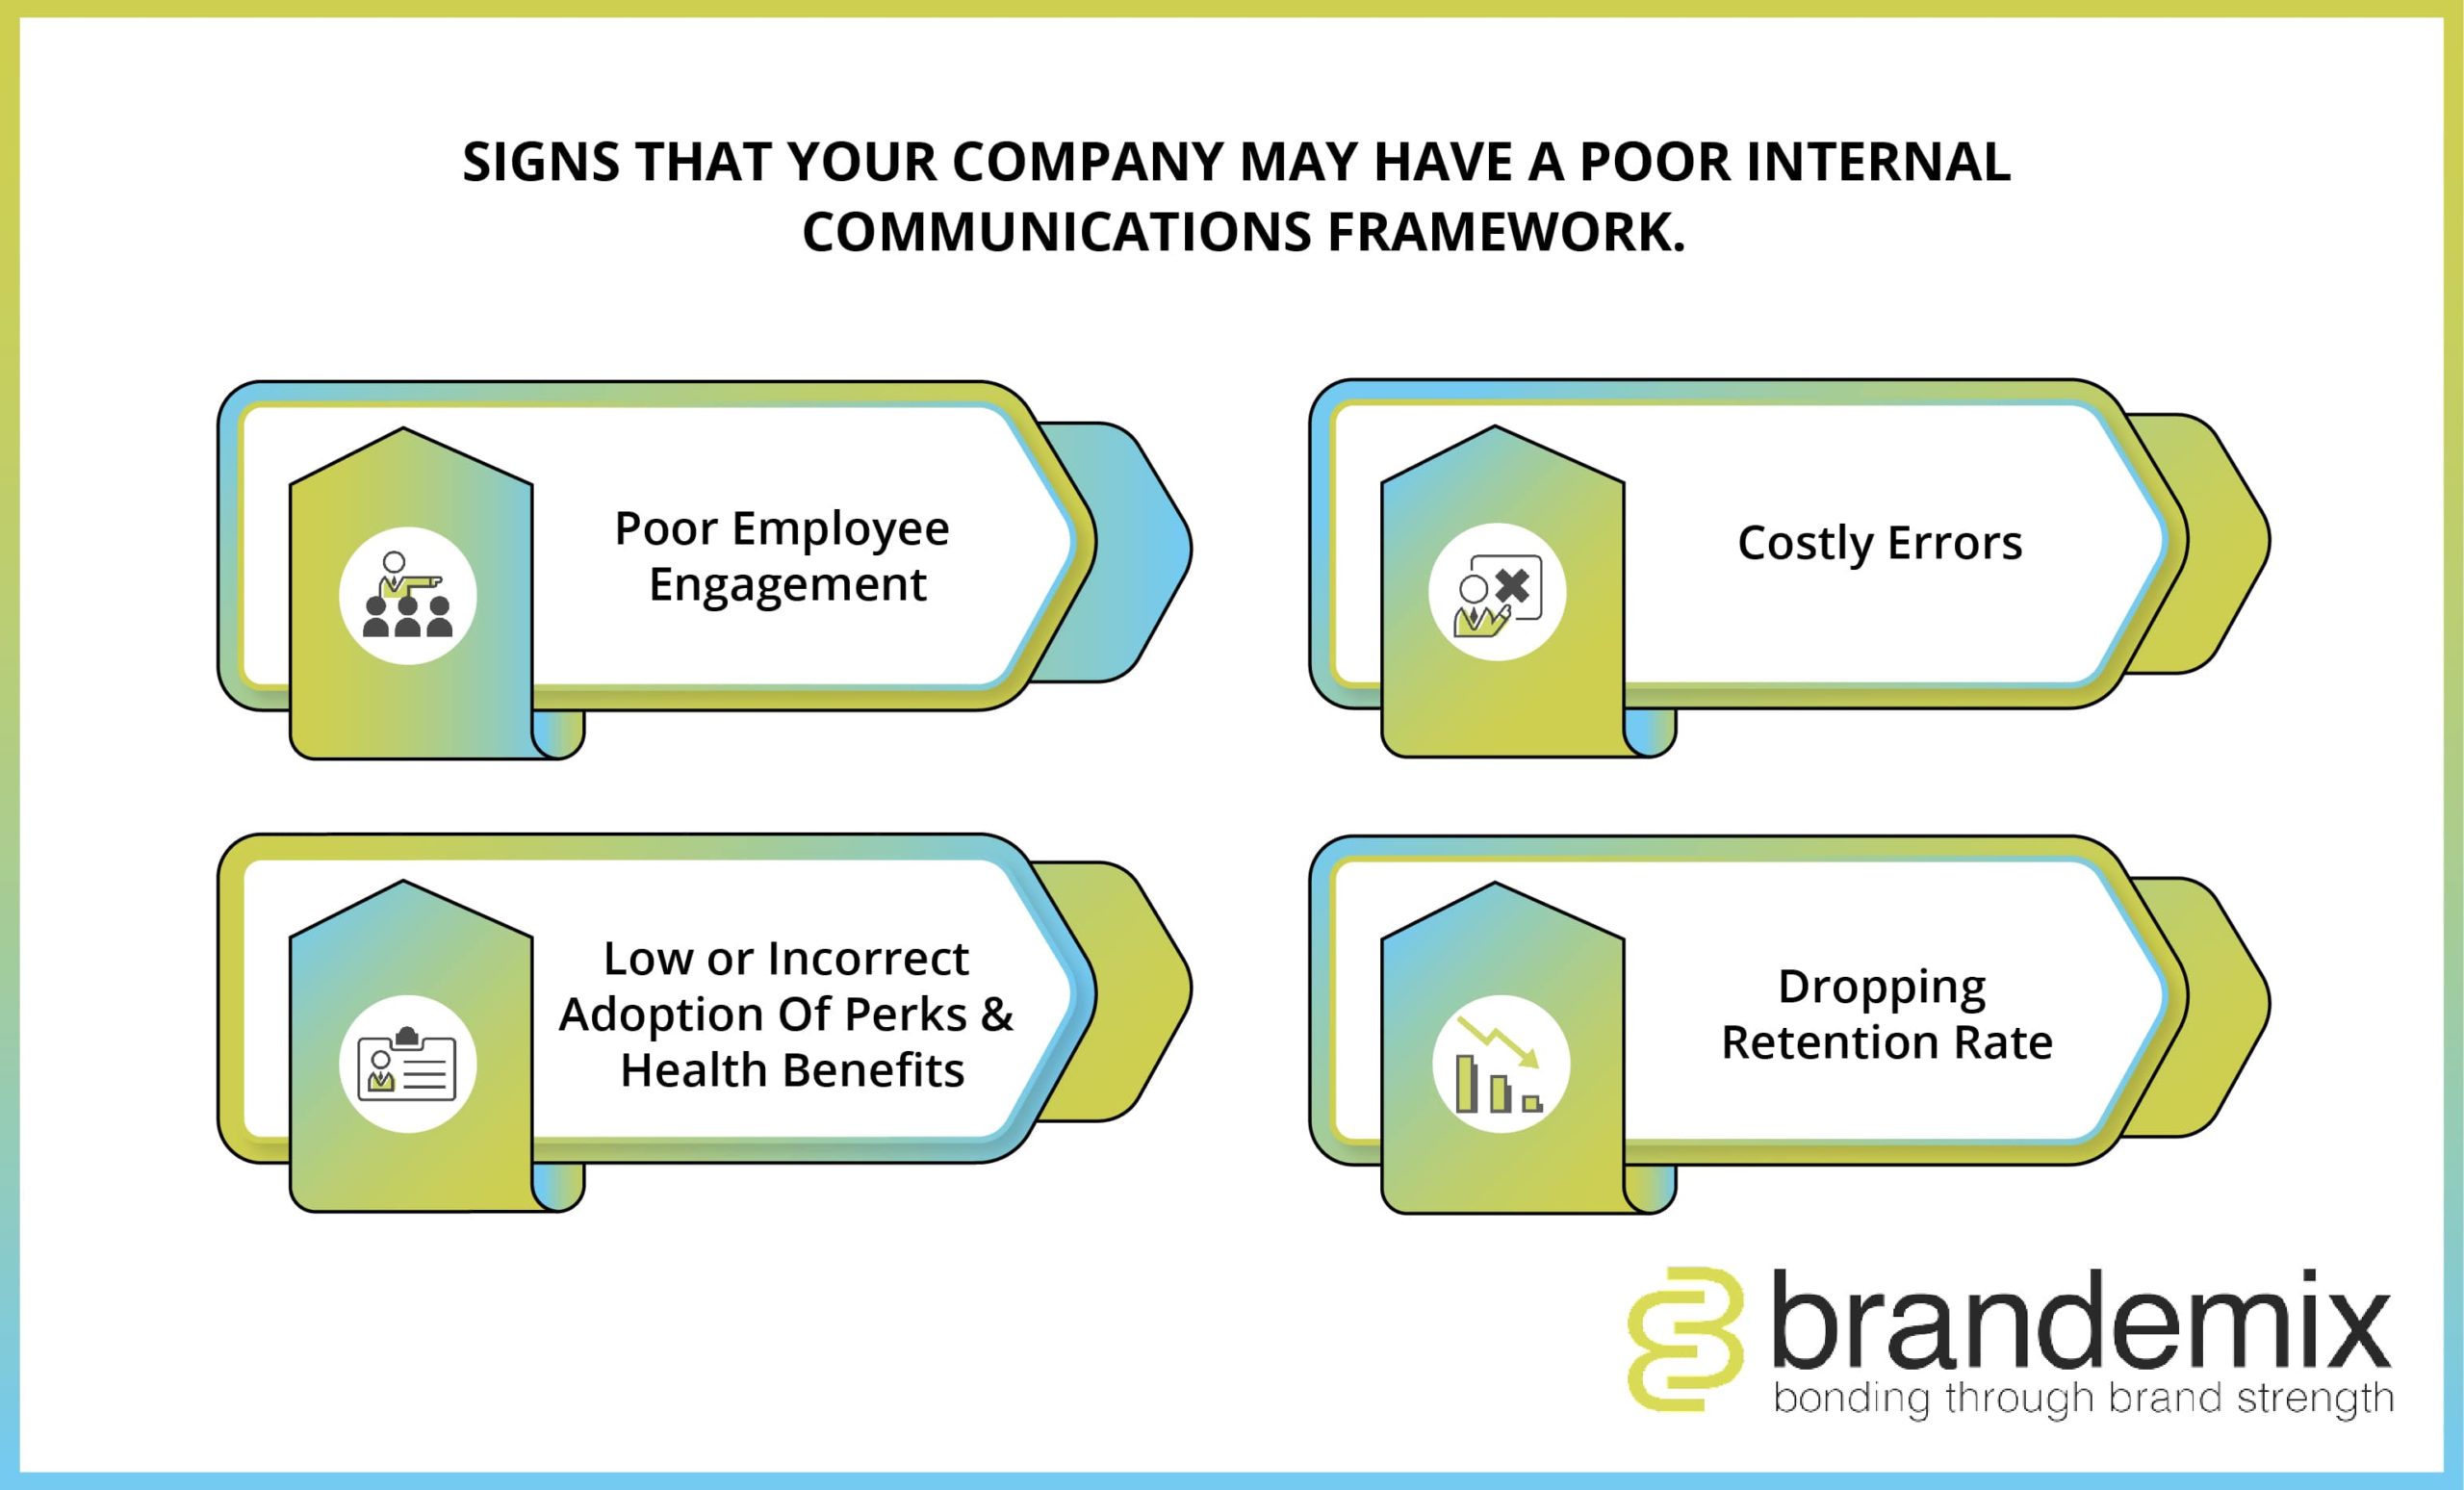 Signs That Your Company May Have a Poor Internal Communications Framework